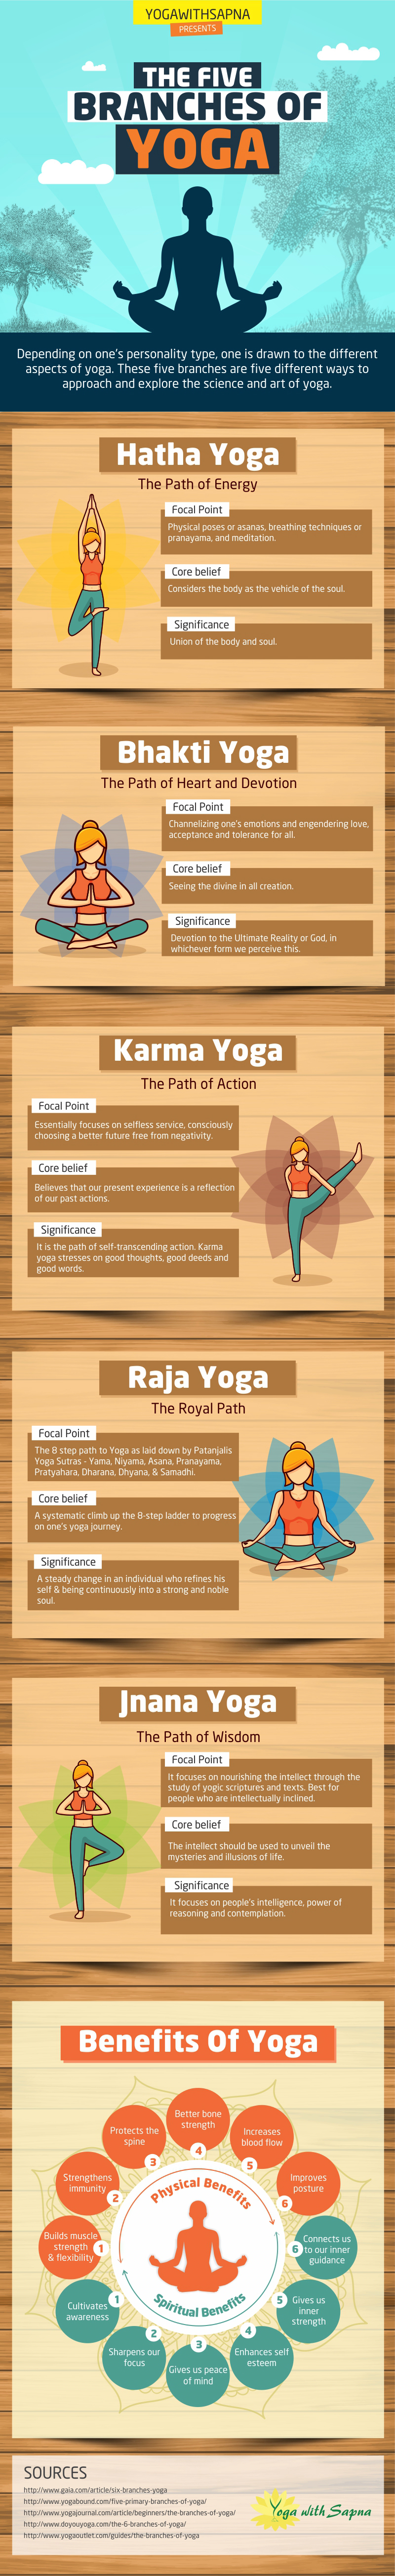 five branches of yoga infographic